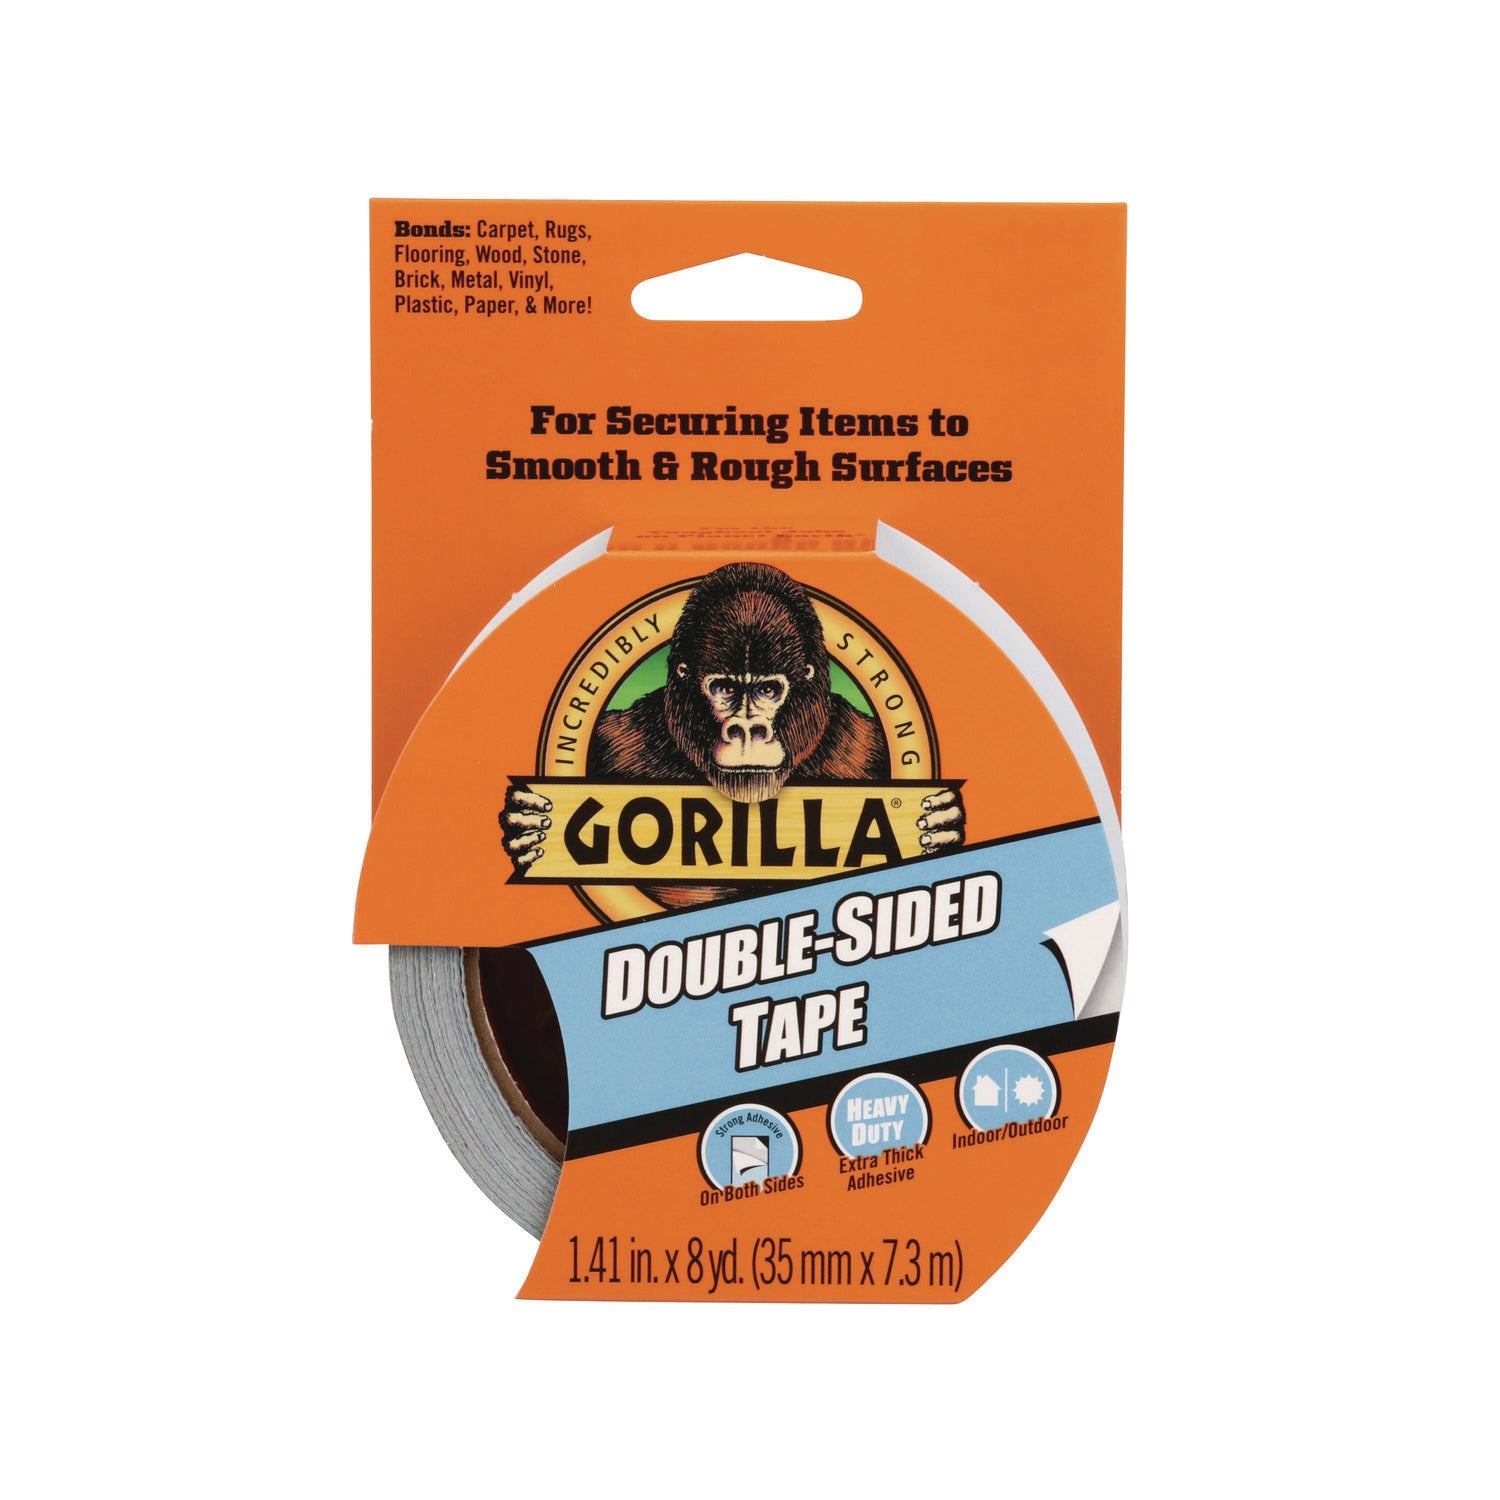 Gorilla Double-Sided Tape - 24 ft Length x 1.40" Width - 1 Roll - Gray - 1